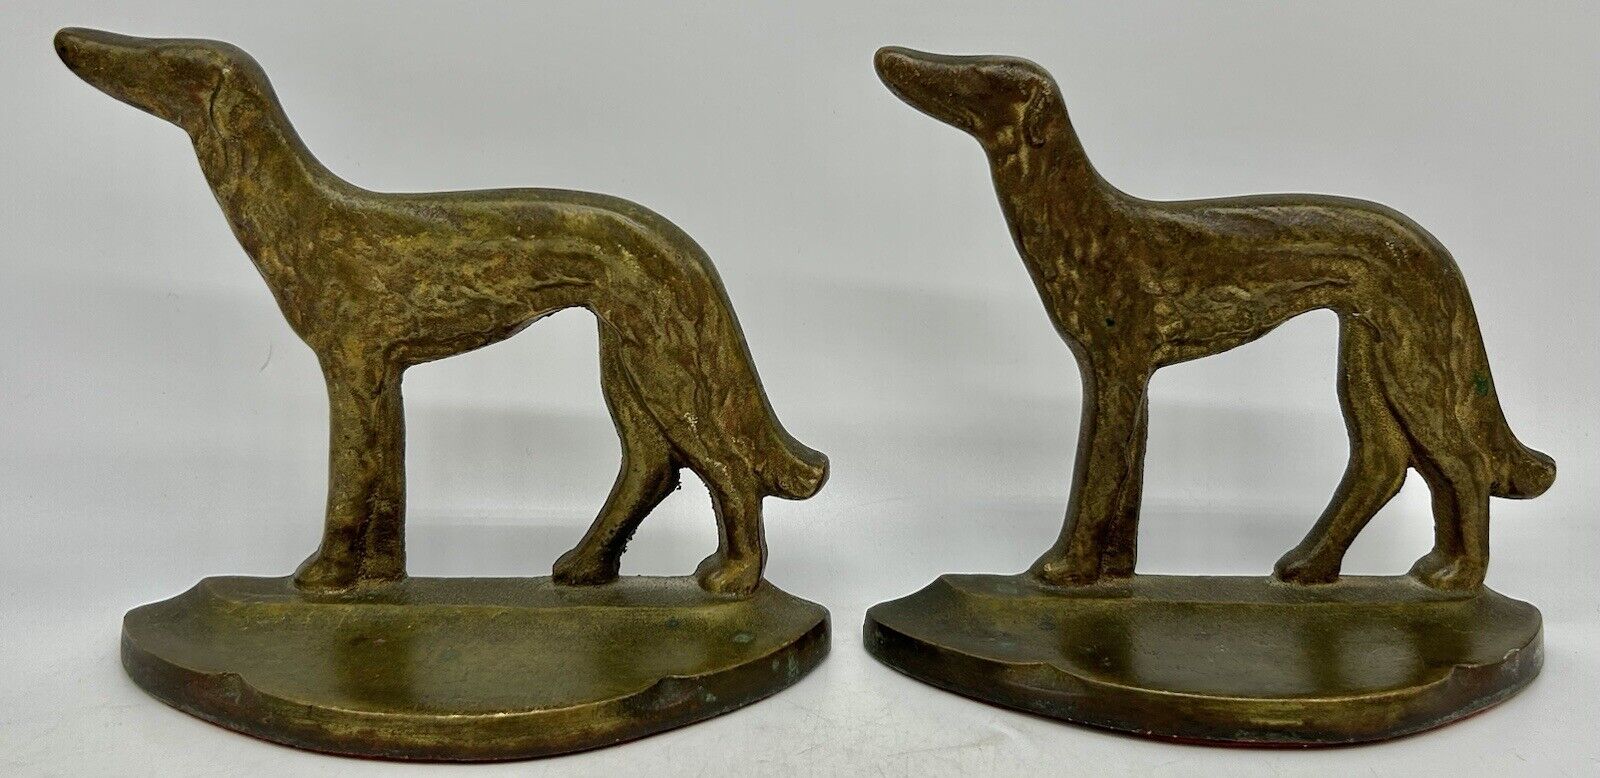 Borzoi Russian Wolfhound Bookends, Connecticut Foundry? 1920's, Art Deco